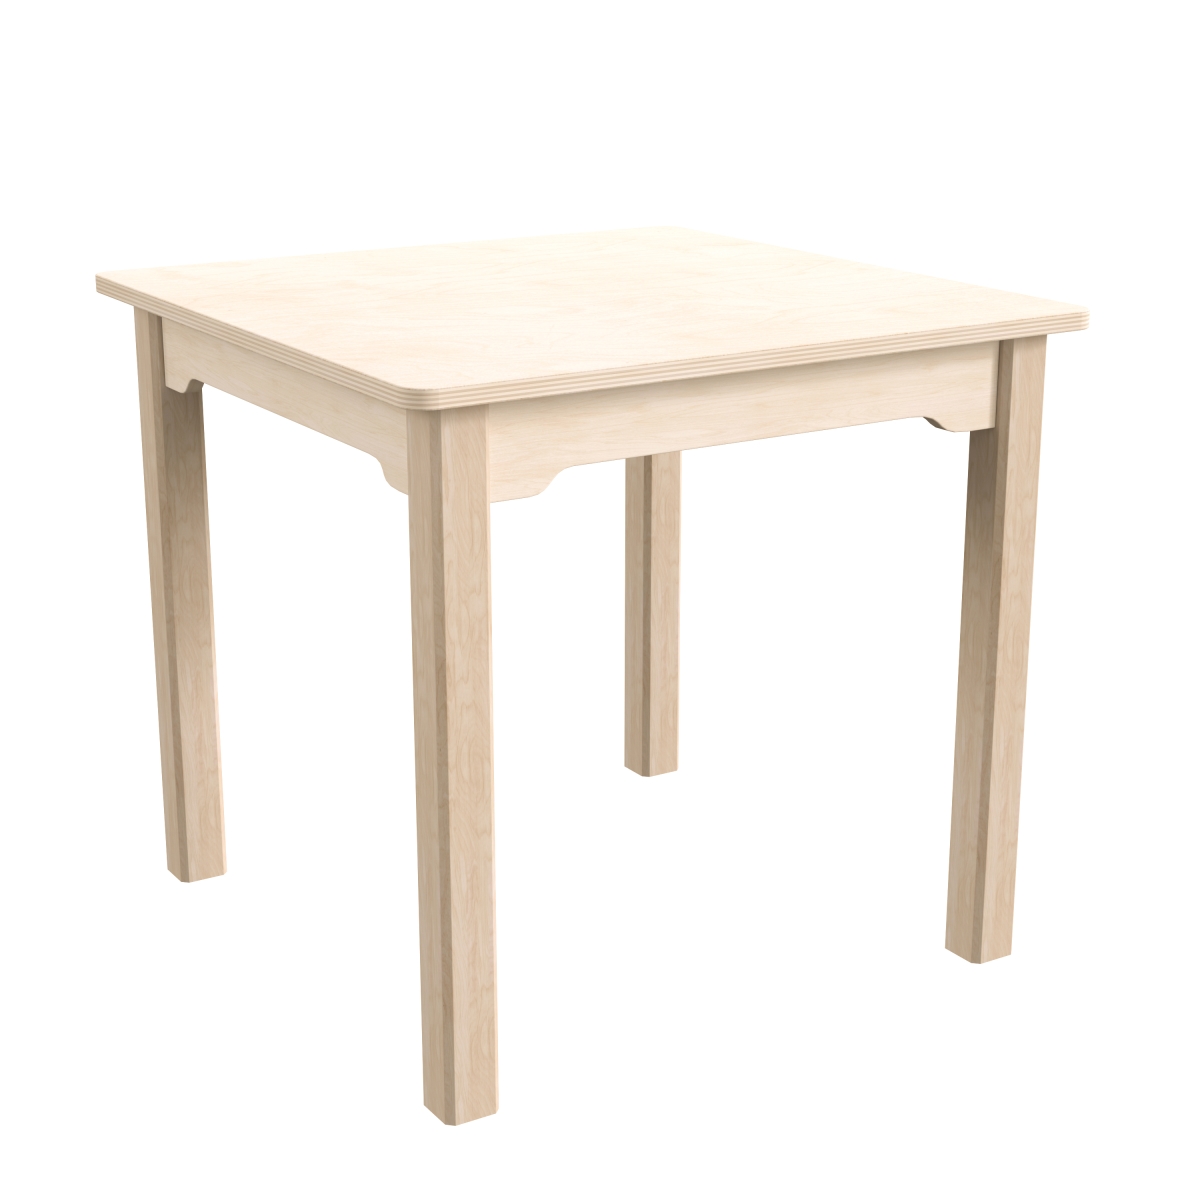 Picture of Flash Furniture MK-ME088009-GG 23.5 x 21.25 in. Bright Beginnings Commercial Grade Wooden Square Preschool Classroom Activity Table, Beech